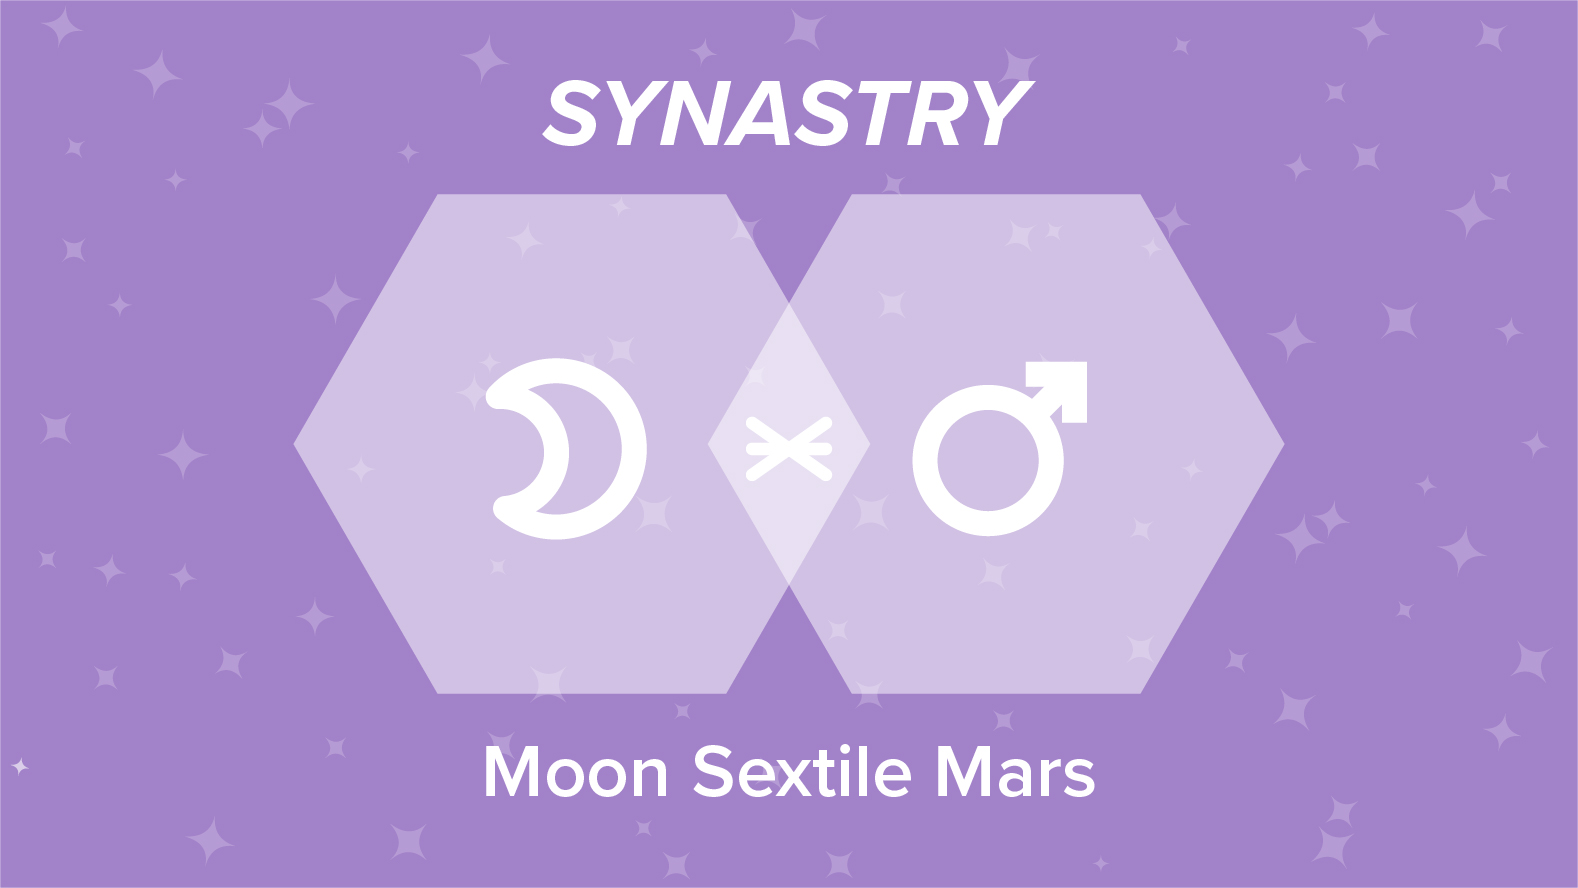 Moon Sextile Mars Synastry: Relationships and Friendships Explained